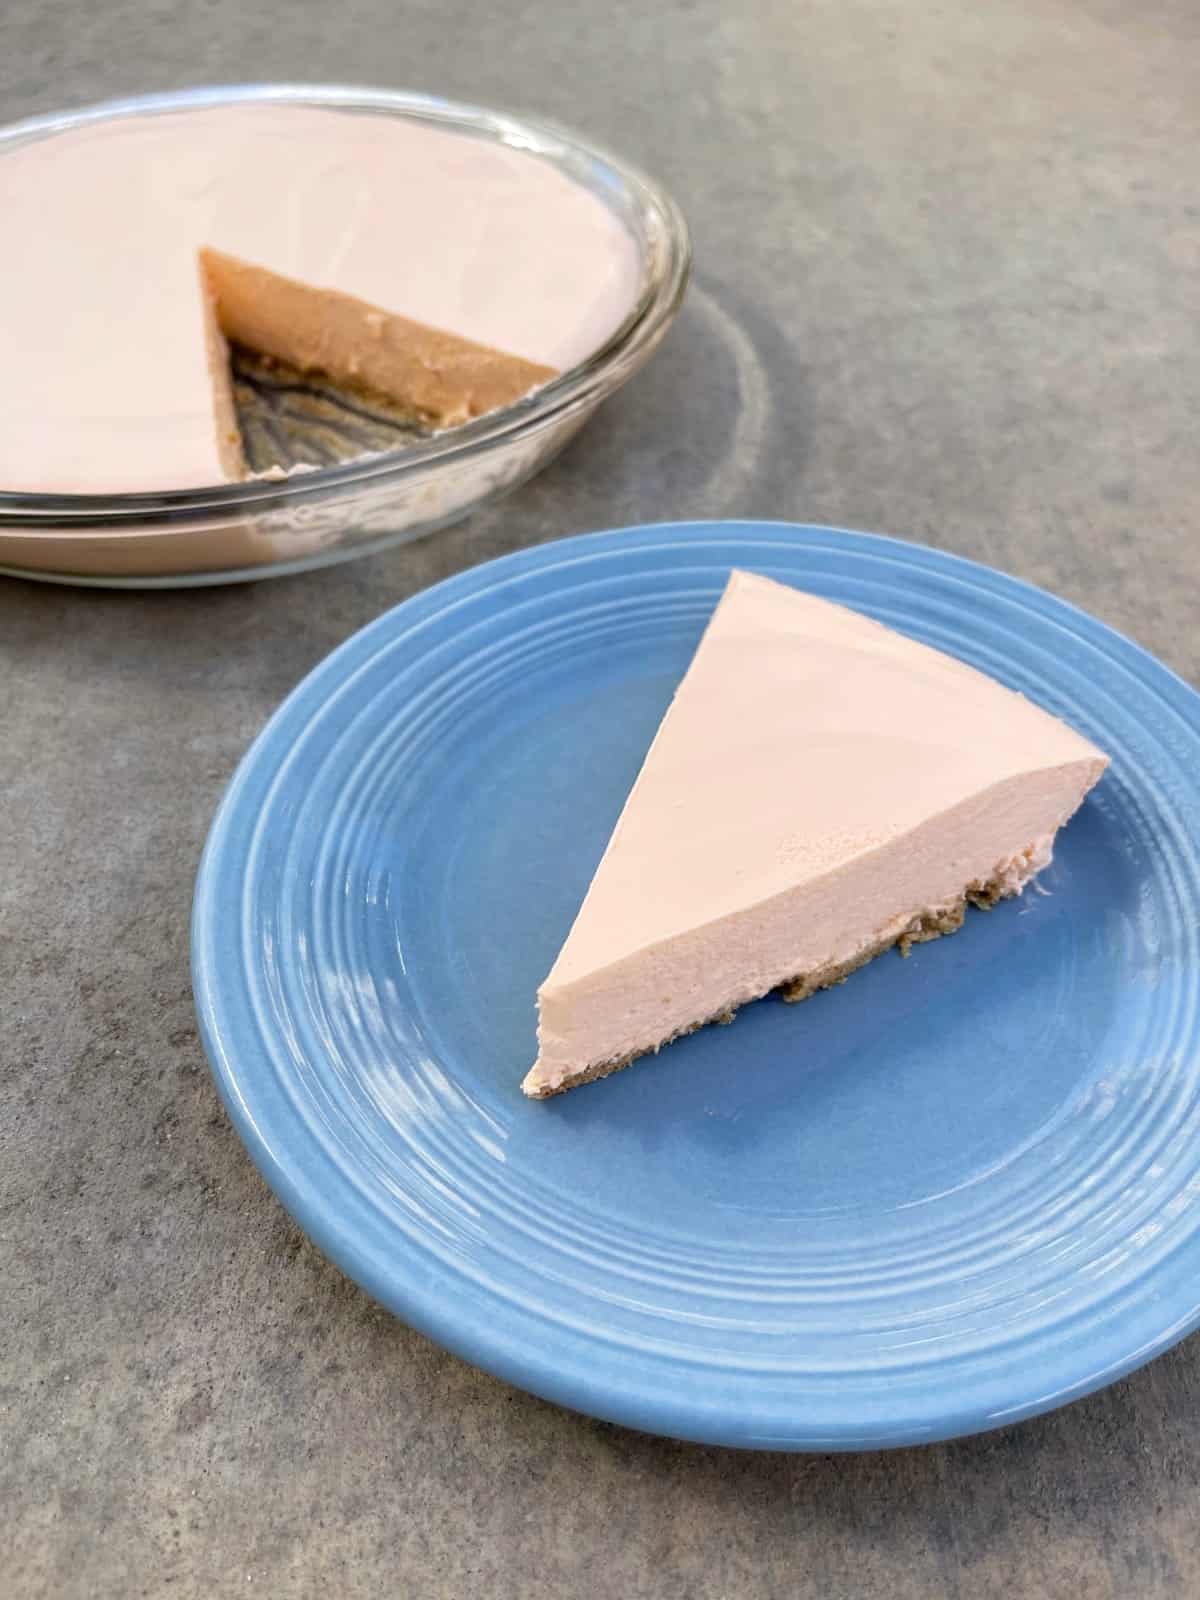 Creamy orange creamsicle no-bake pie piece on blue plate with pie dish in background.